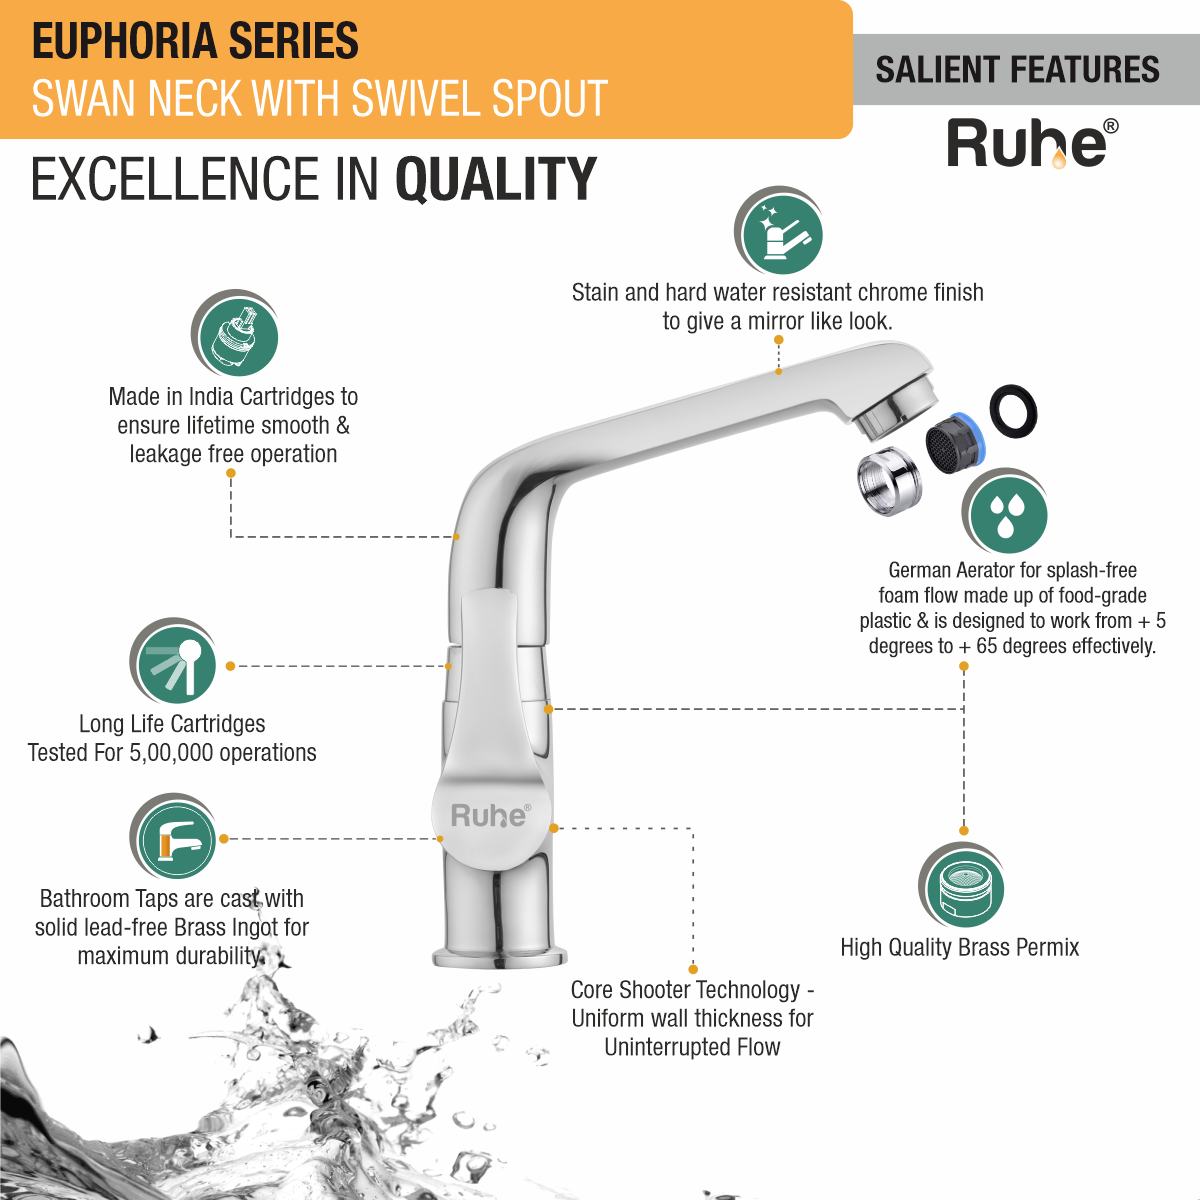 Euphoria Swan Neck With Swivel Spout Faucet features